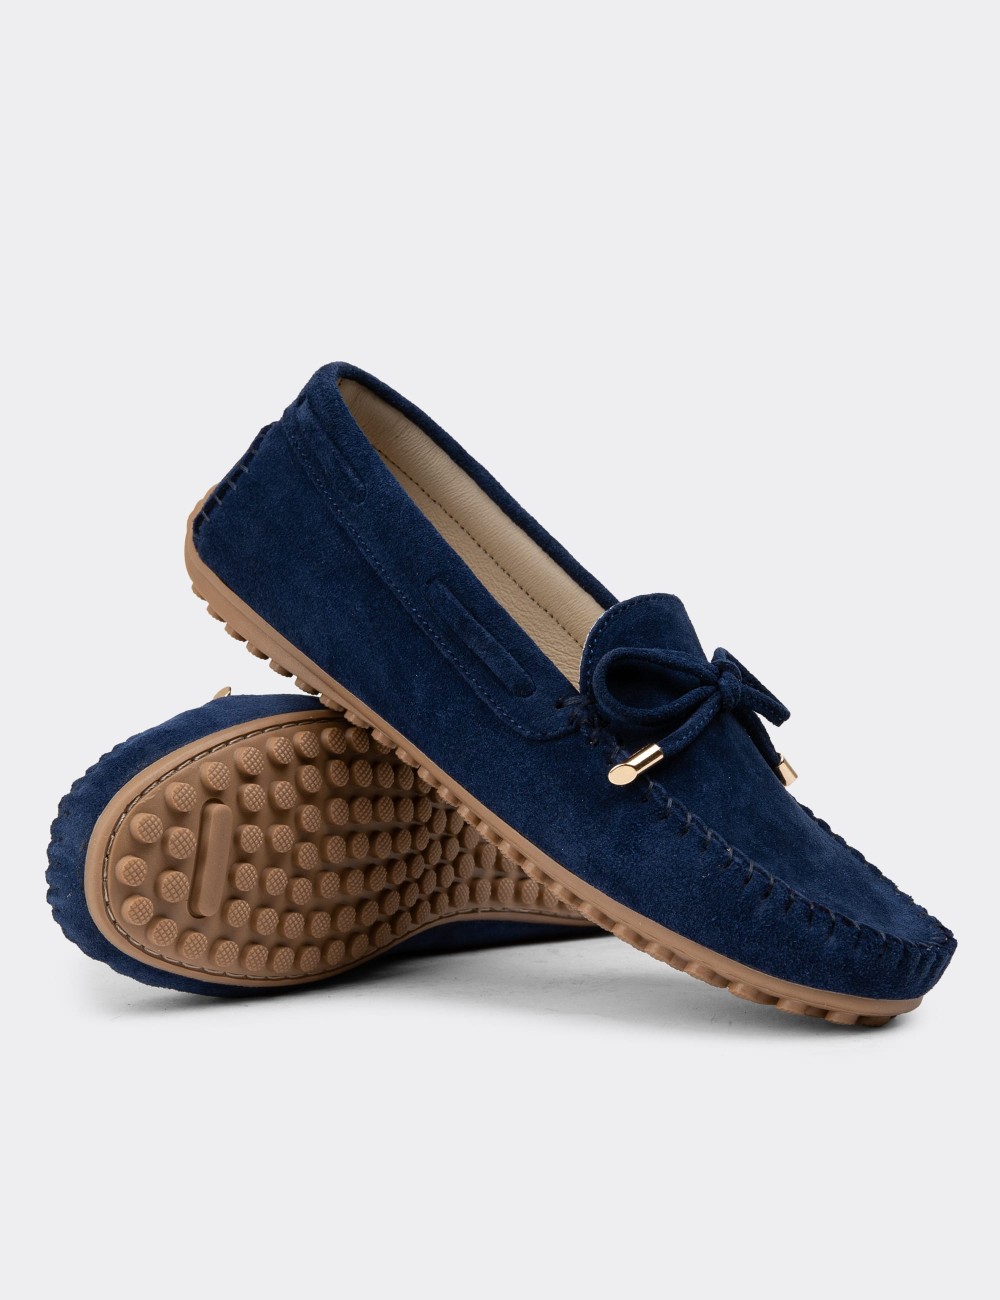 Navy Suede Leather Driving Shoes - SW101ZLCVC01